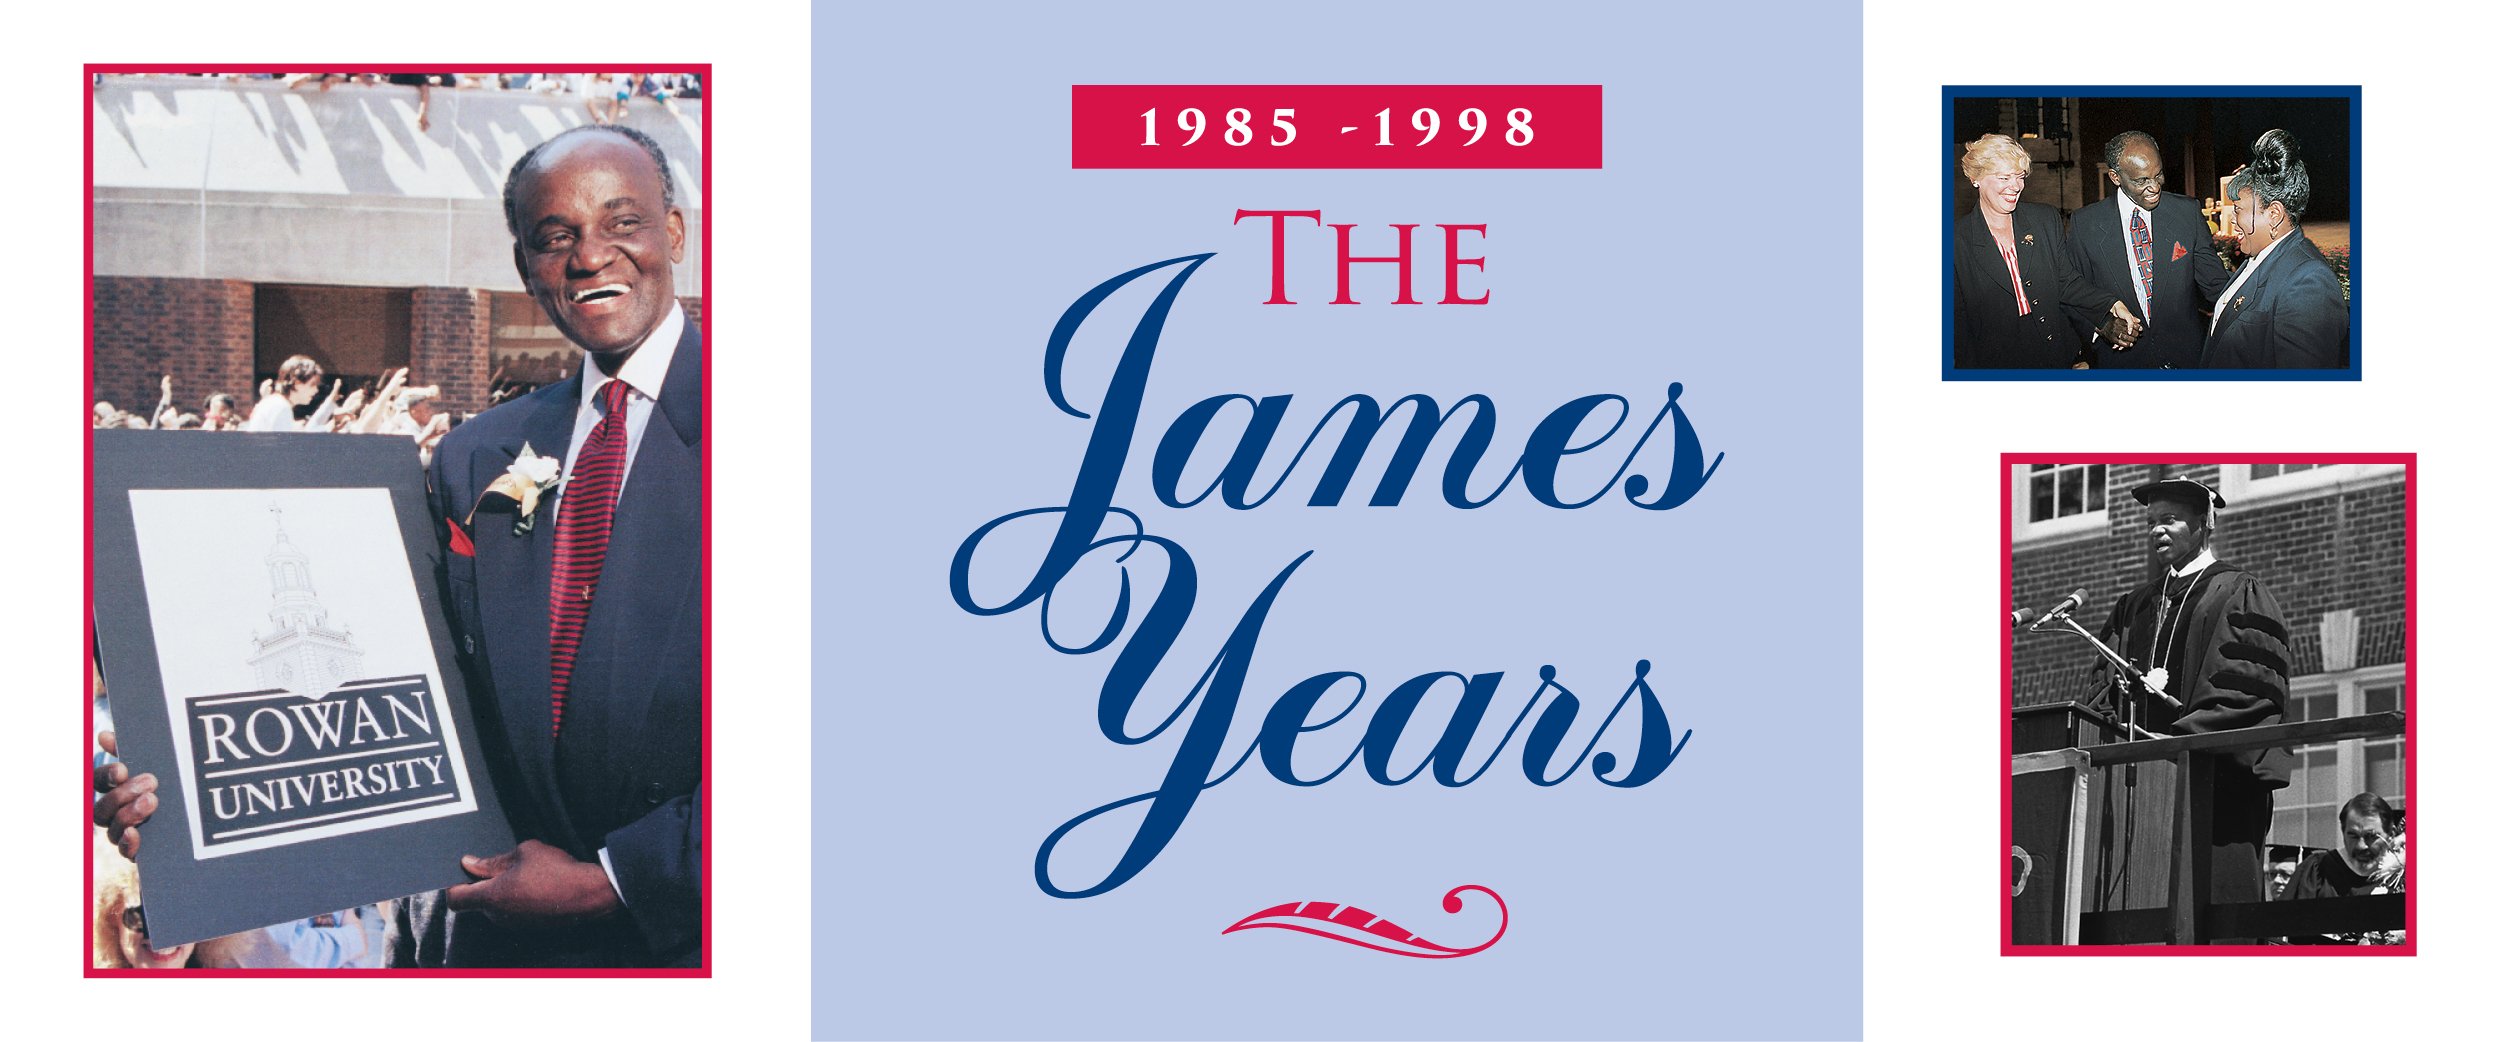 1985-1998: The James Years